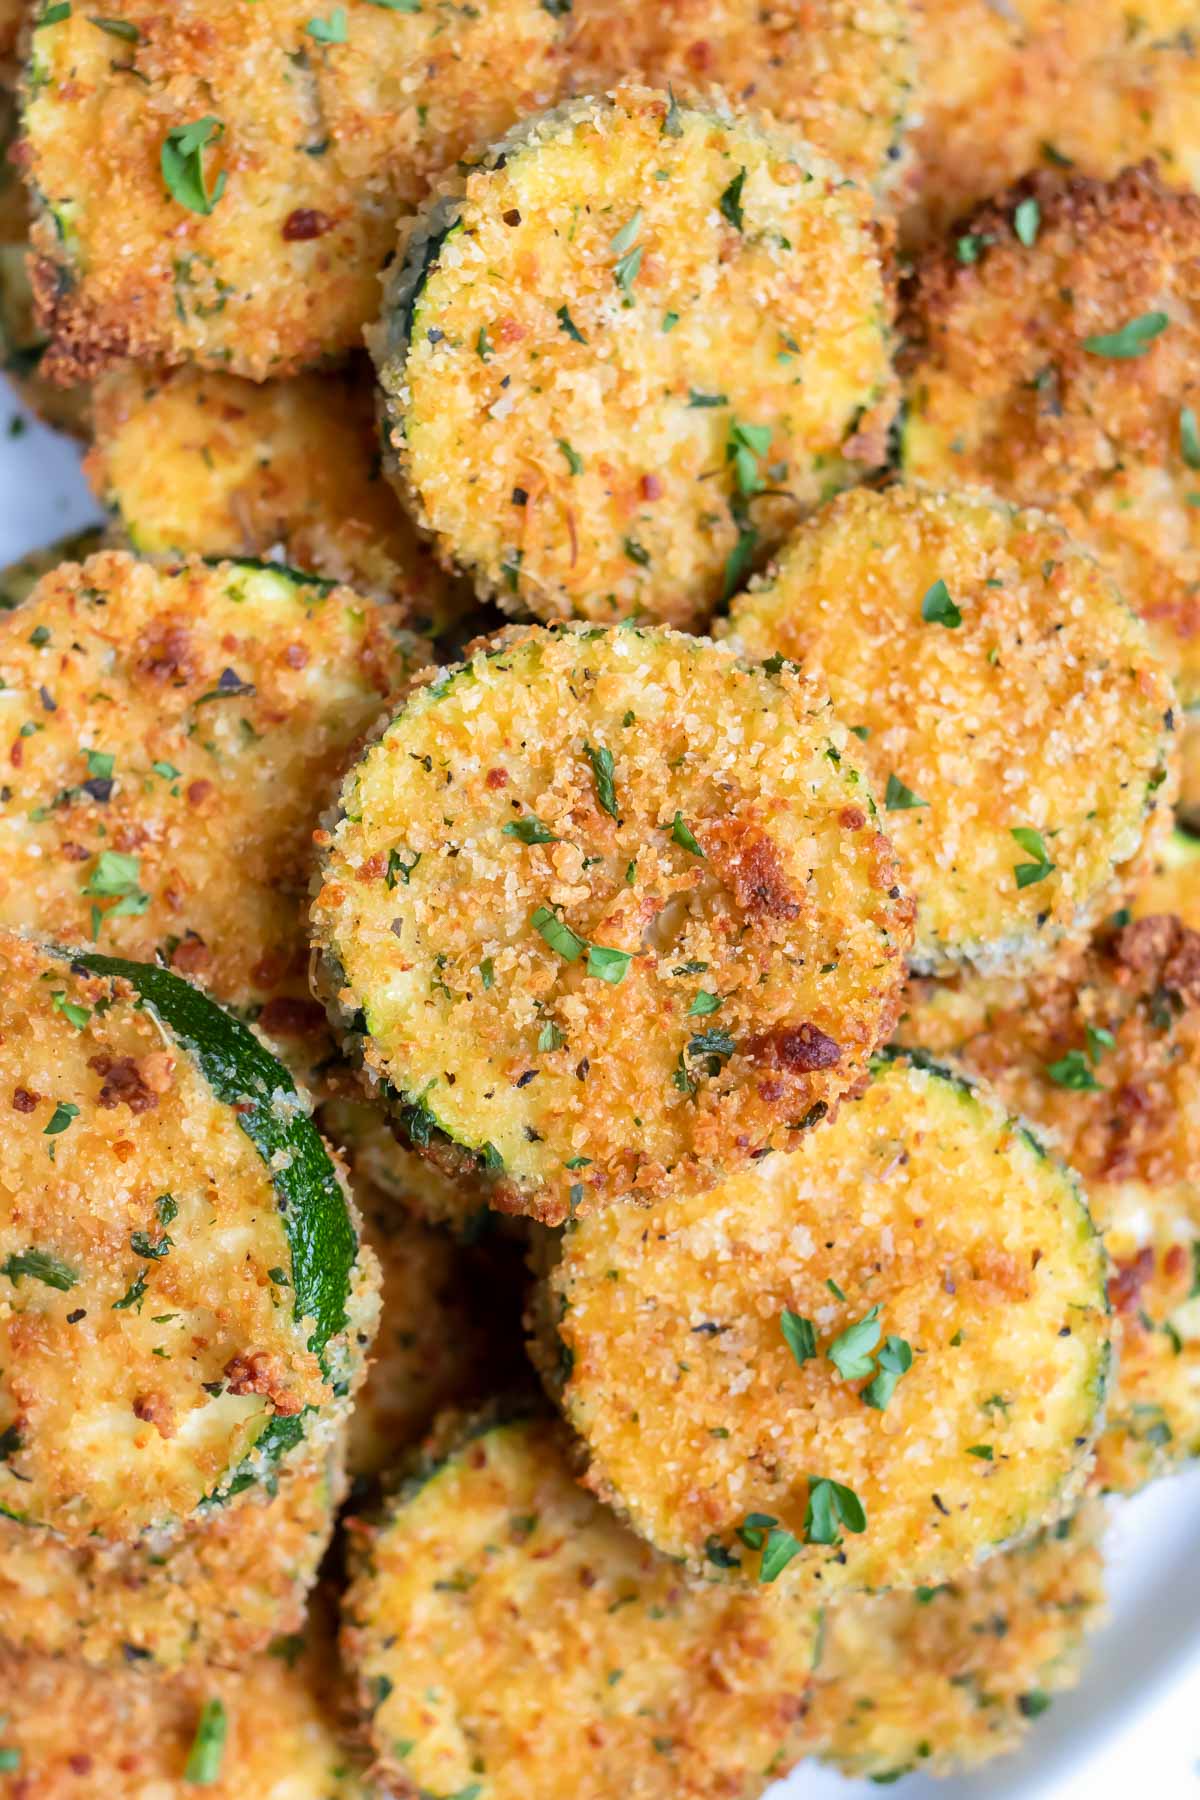 A pile of air fryer zucchini chips are shown for a healthy gluten-free appetizer.